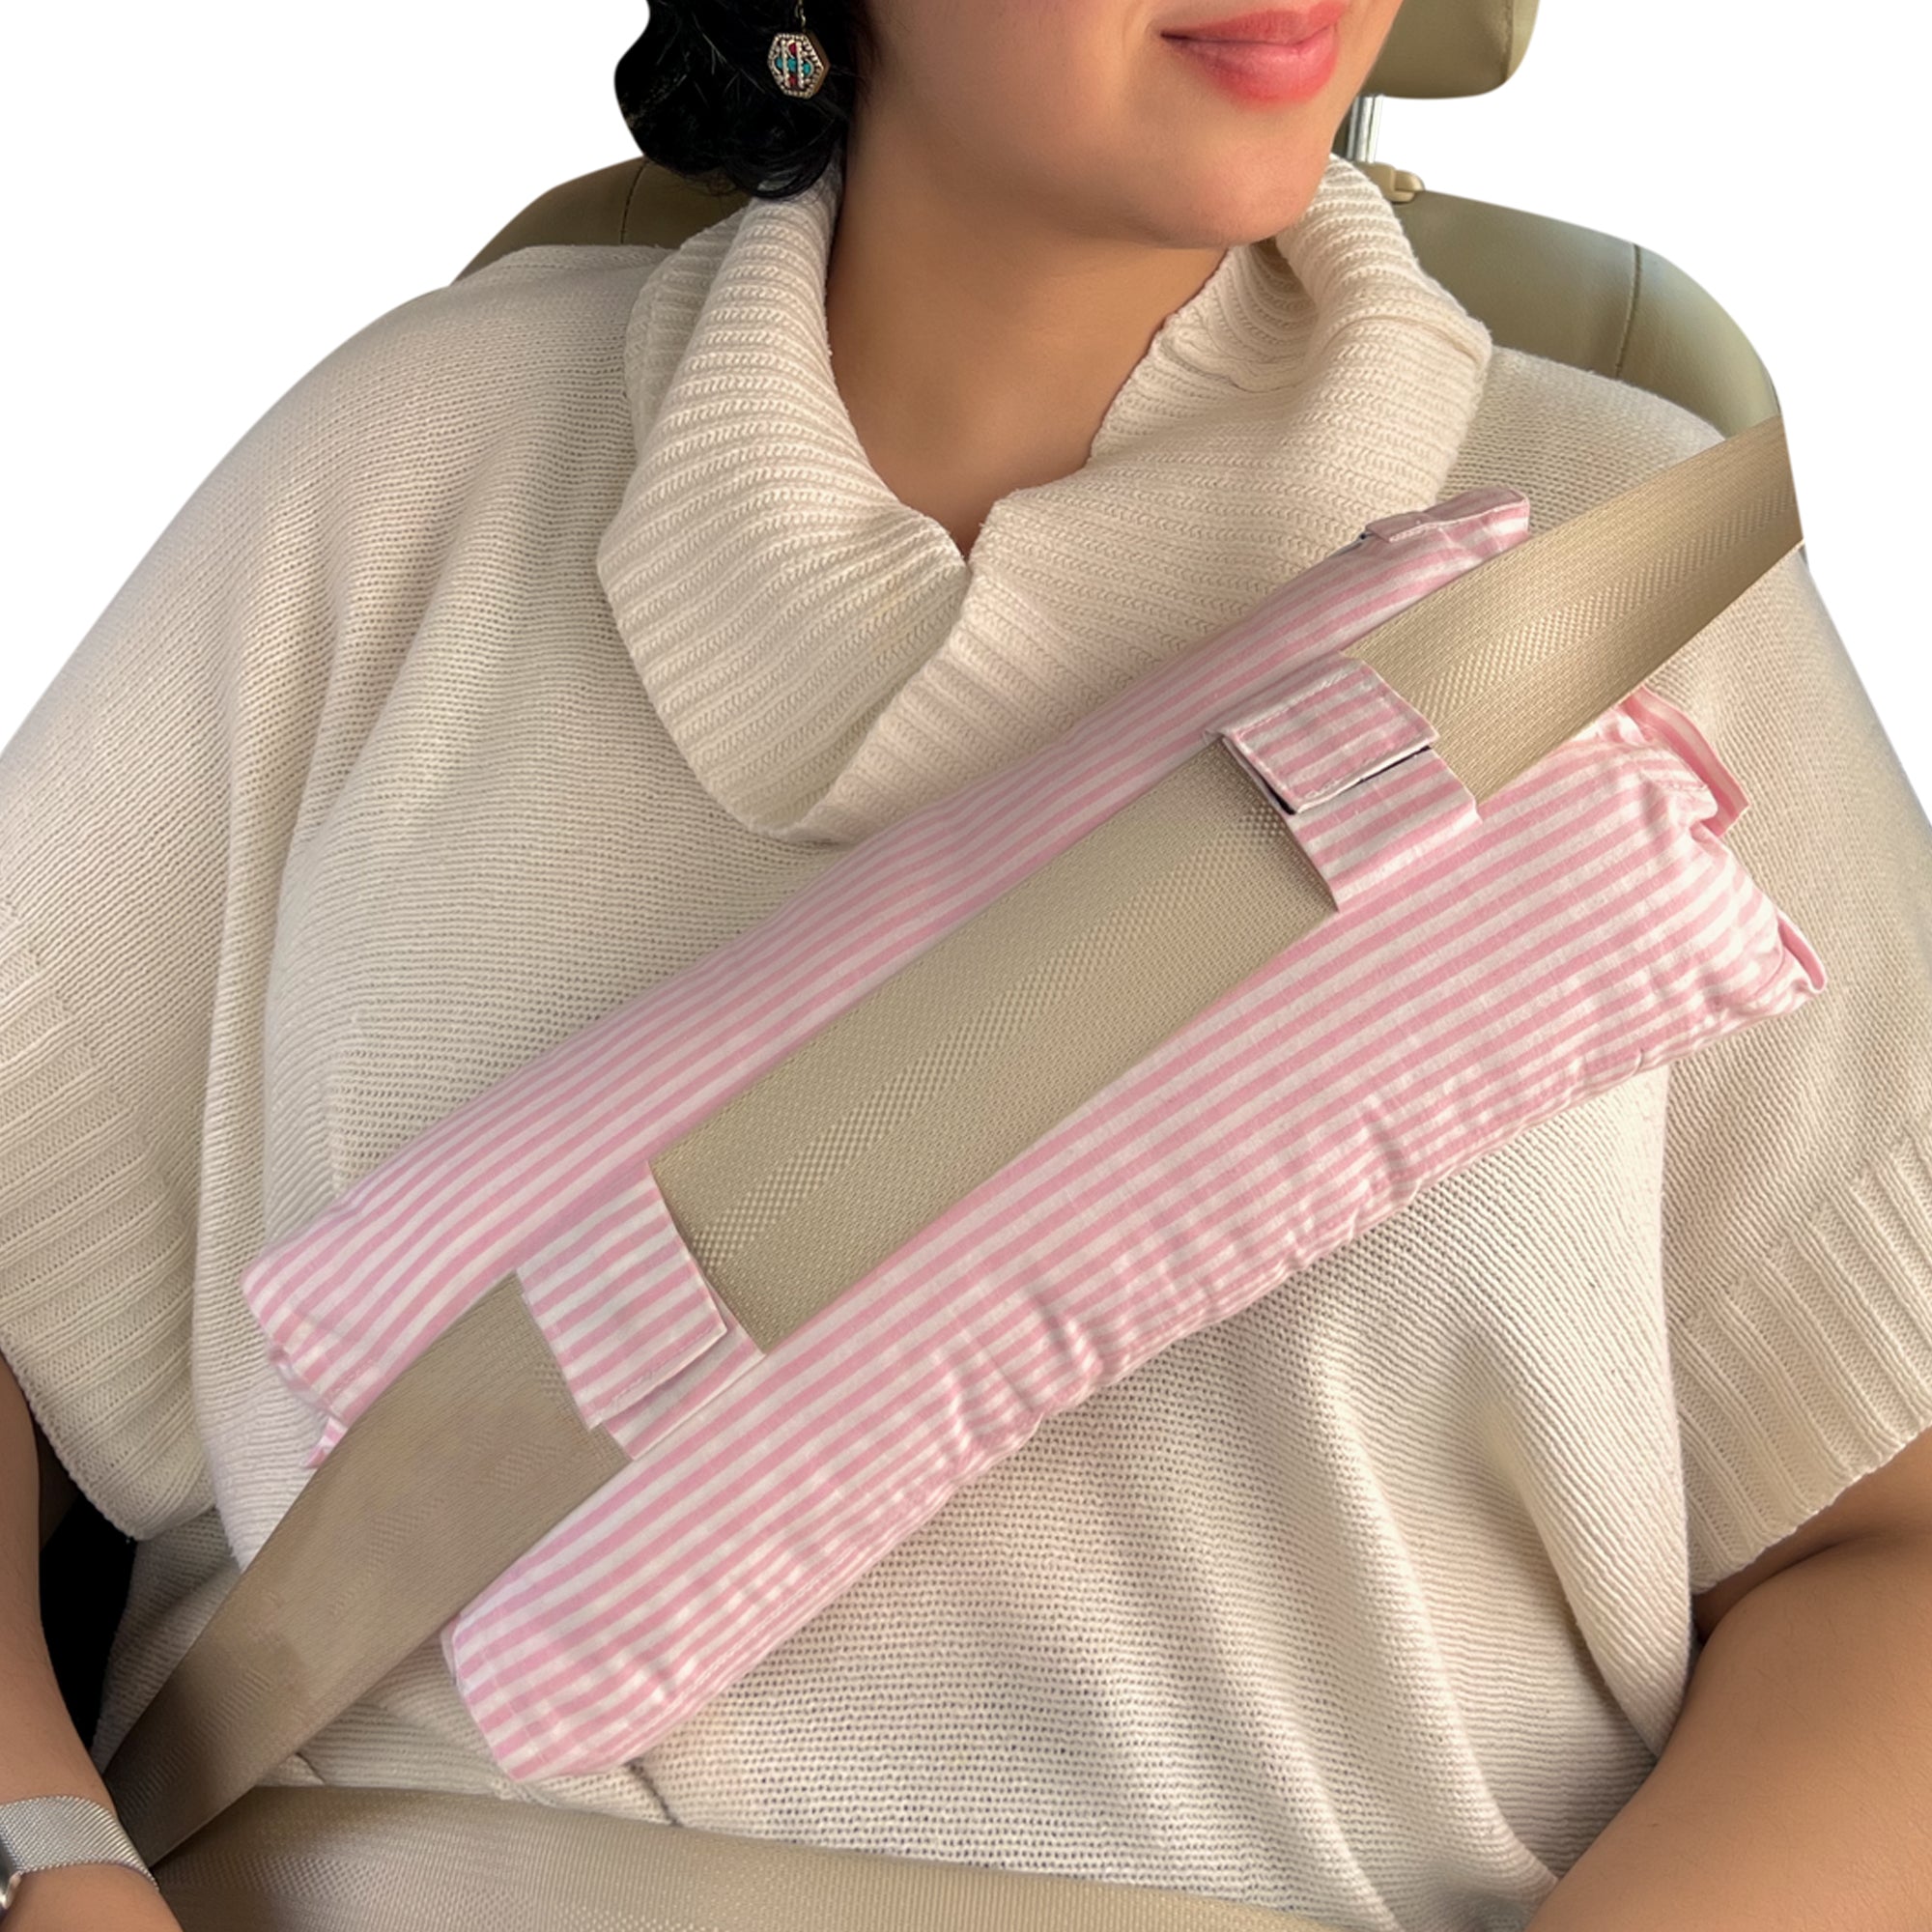 Hysterectomy or Surgery Comfort Pillow Stripes 